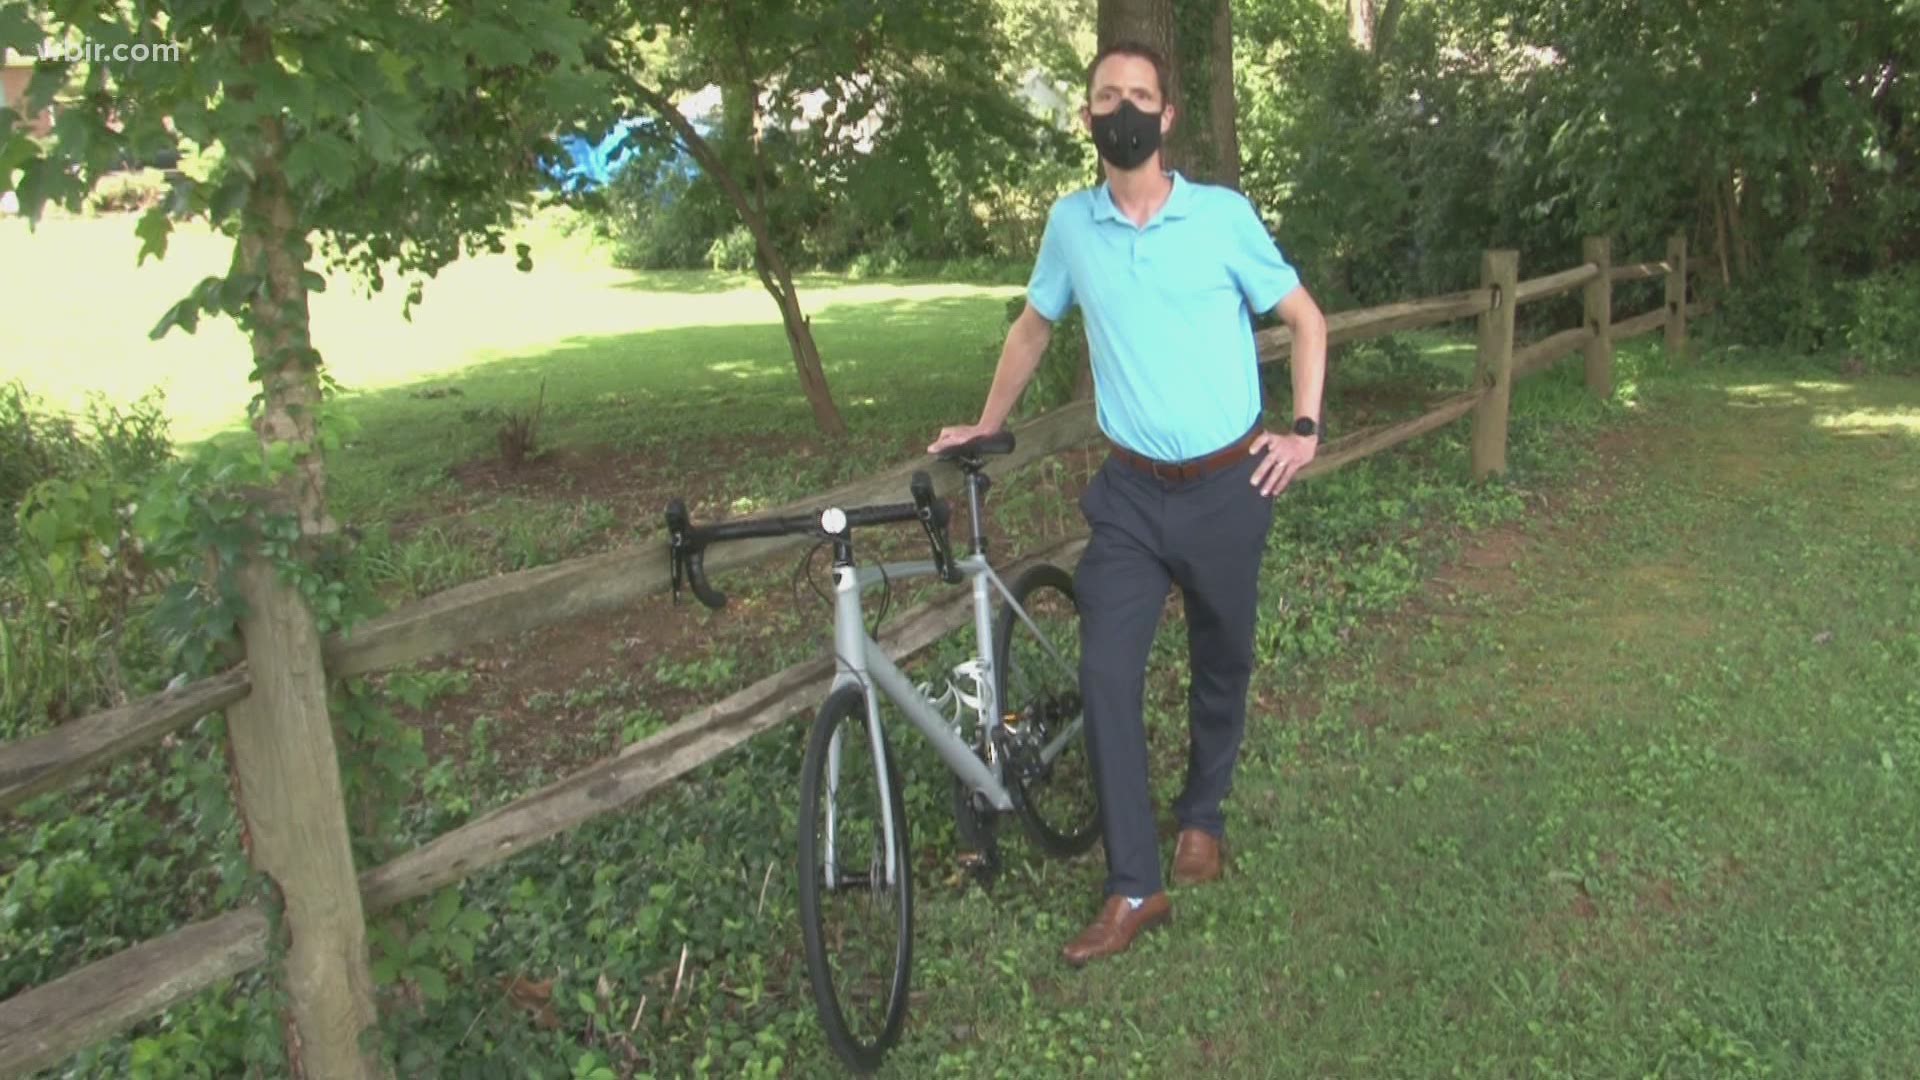 A Carson-Newman professor is planning to bike 100 miles from Johnson City to Downtown Knoxville.